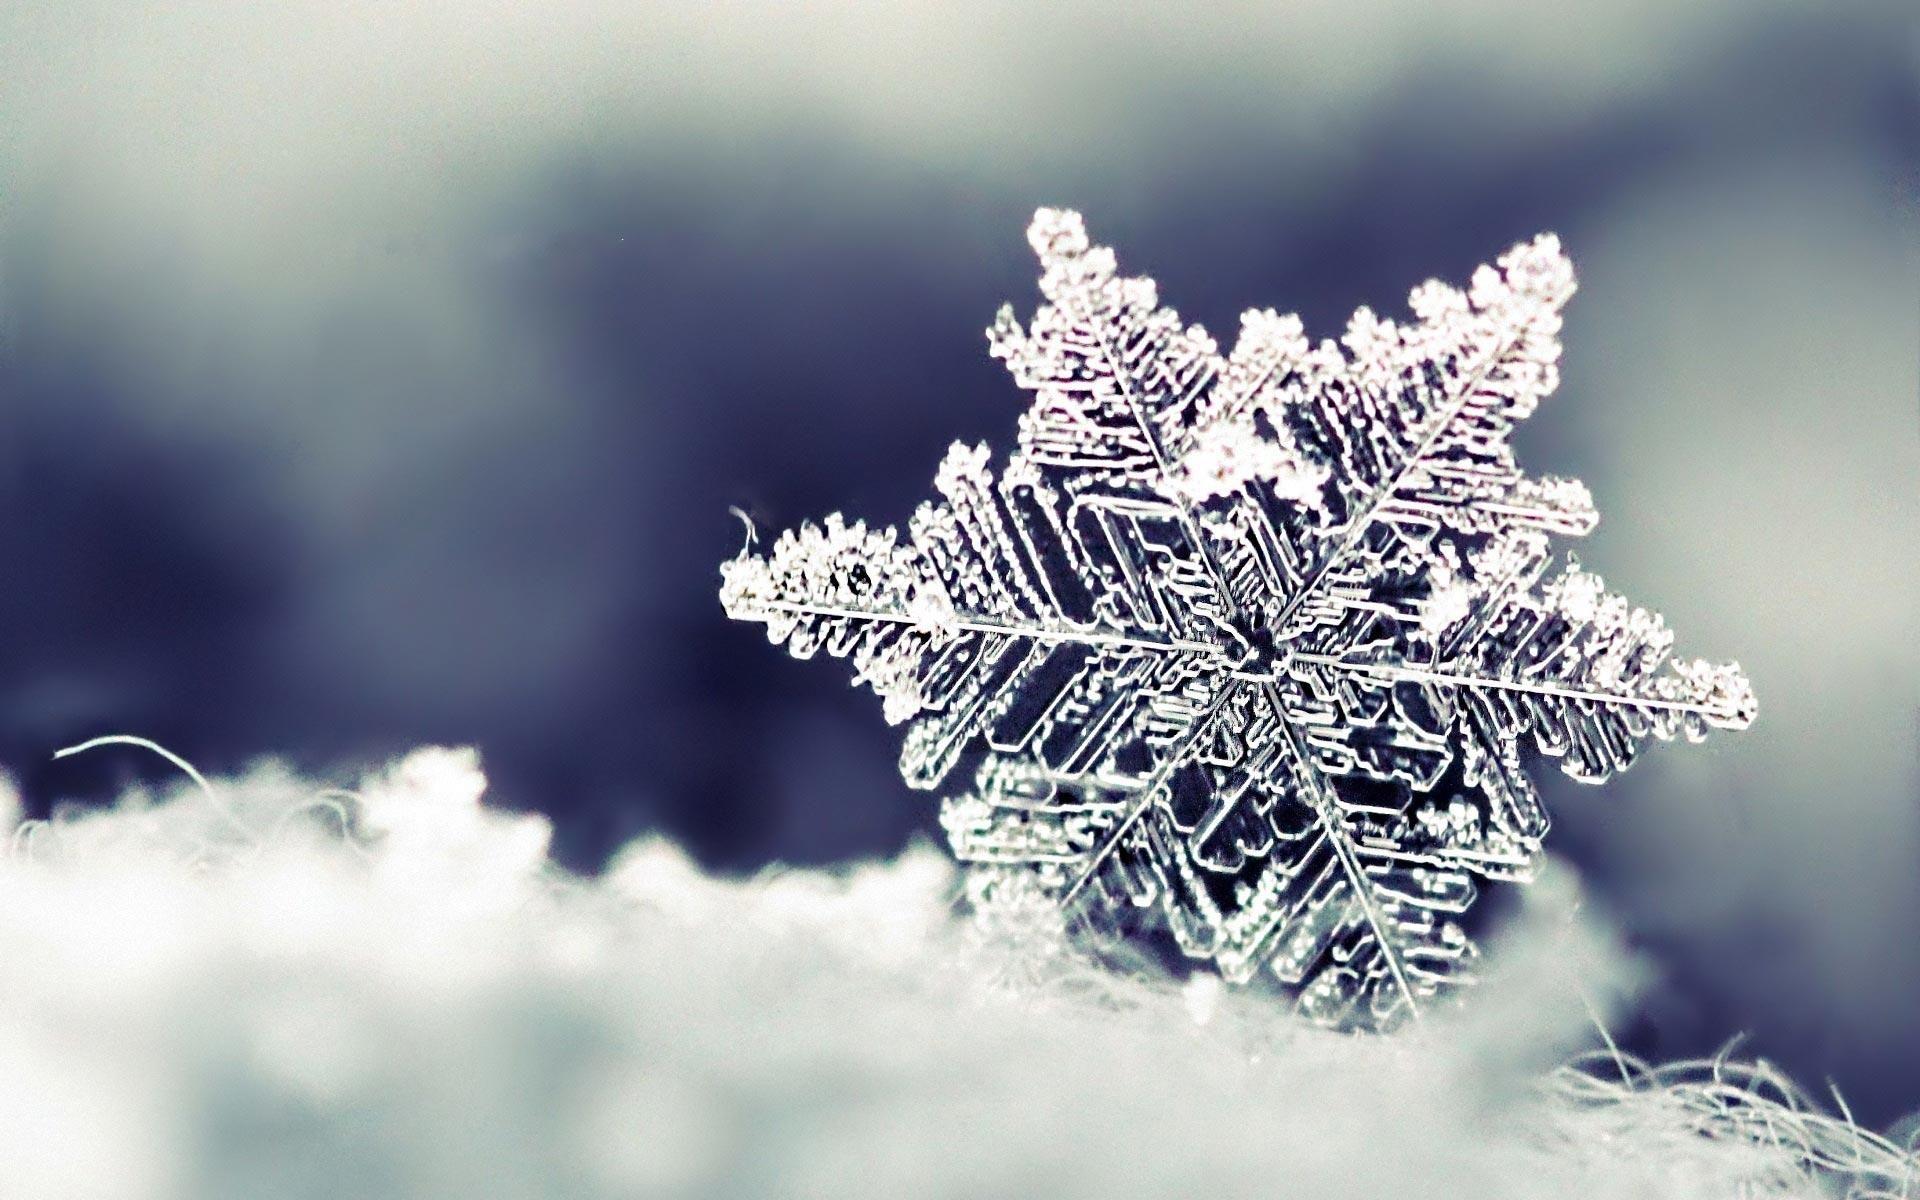 Snowflake up close!!. Nature. Winter photography